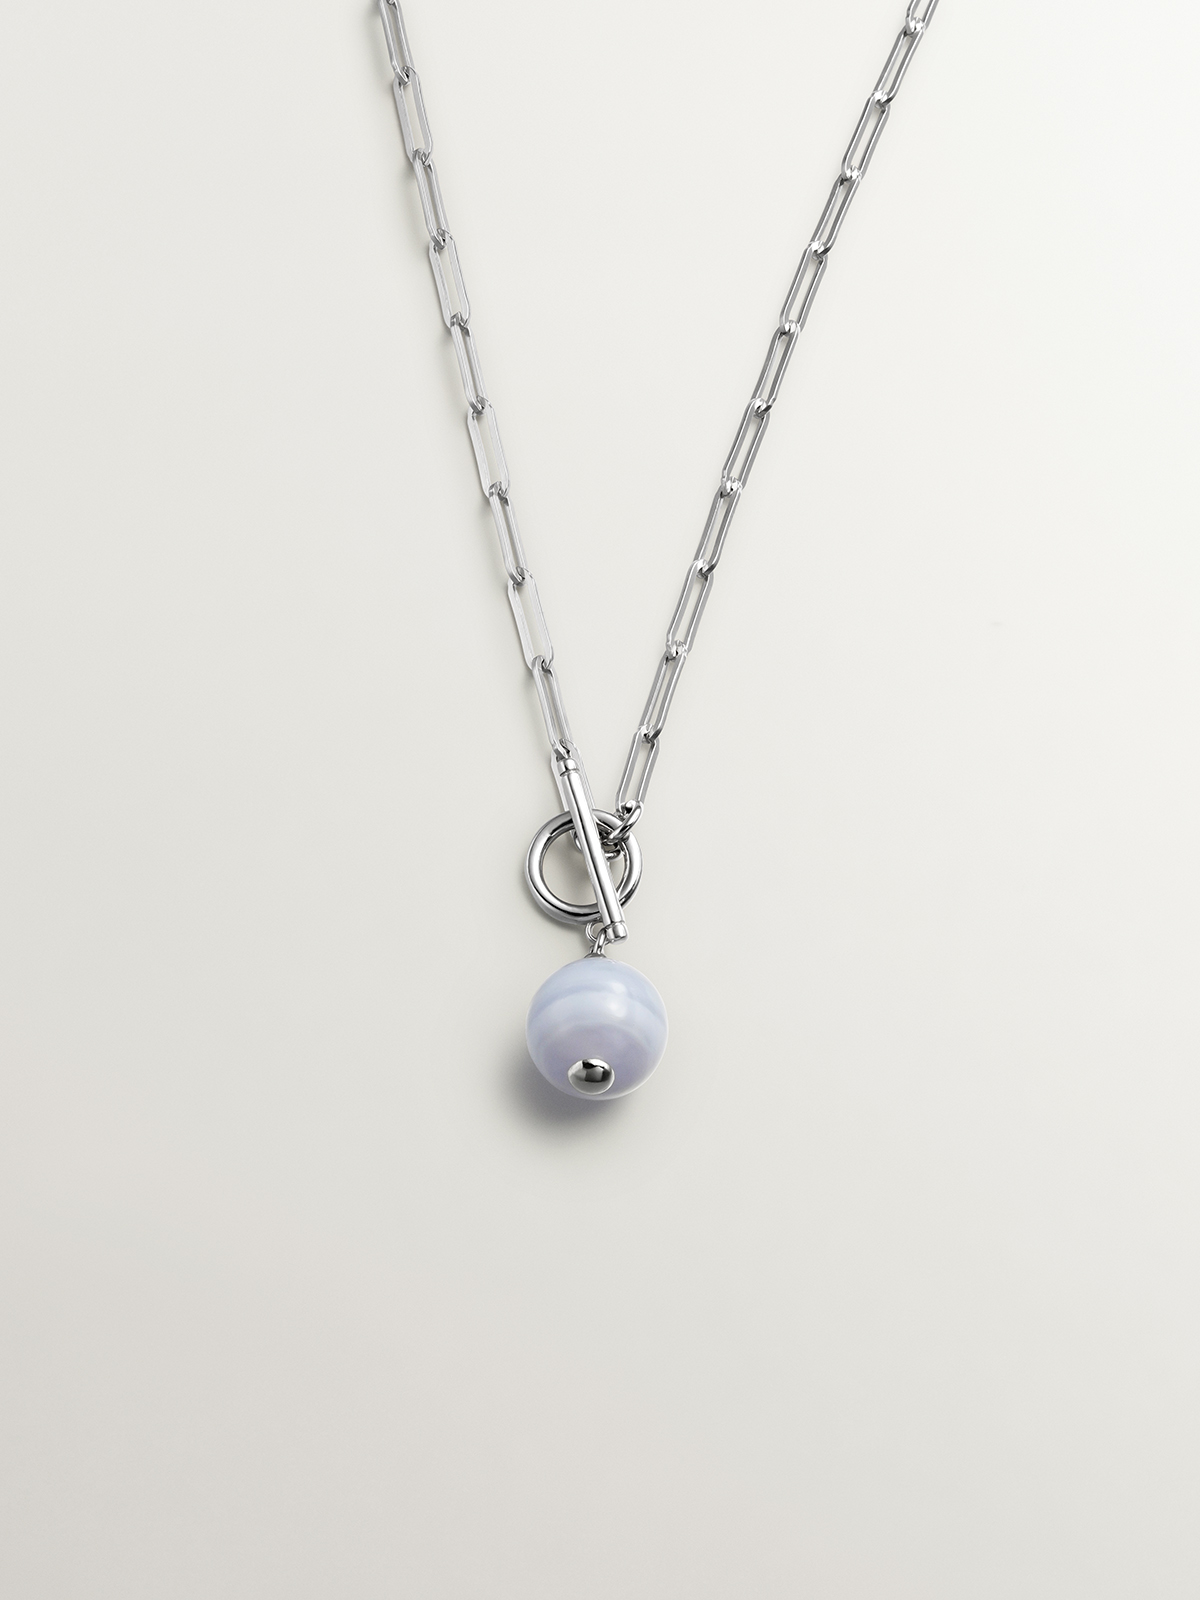 925 silver chain with blue agate